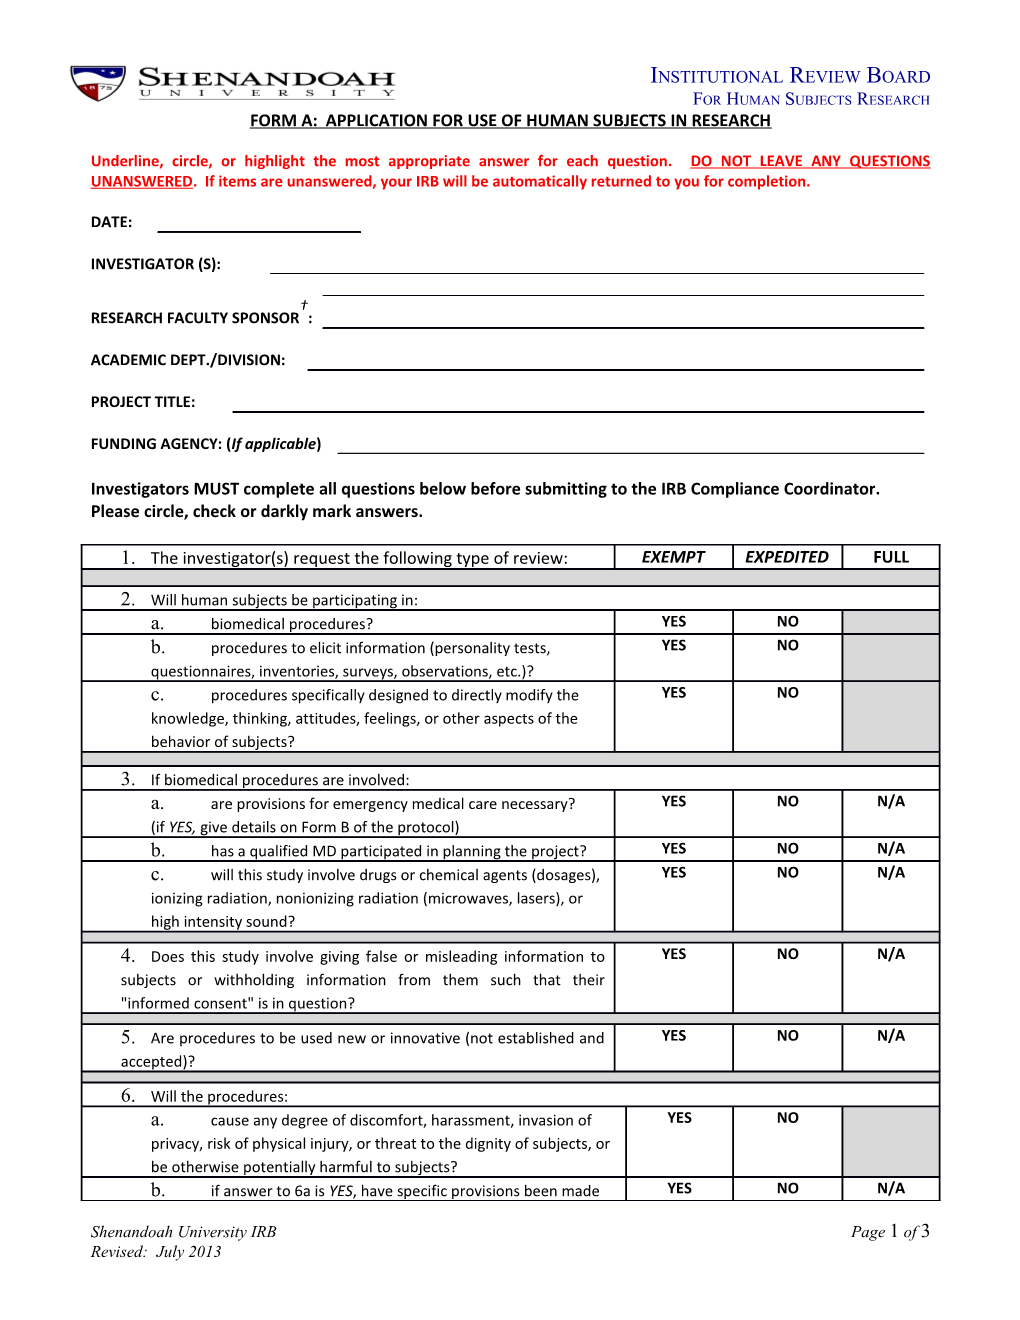 Form A: Application for Use of Human Subjects in Research